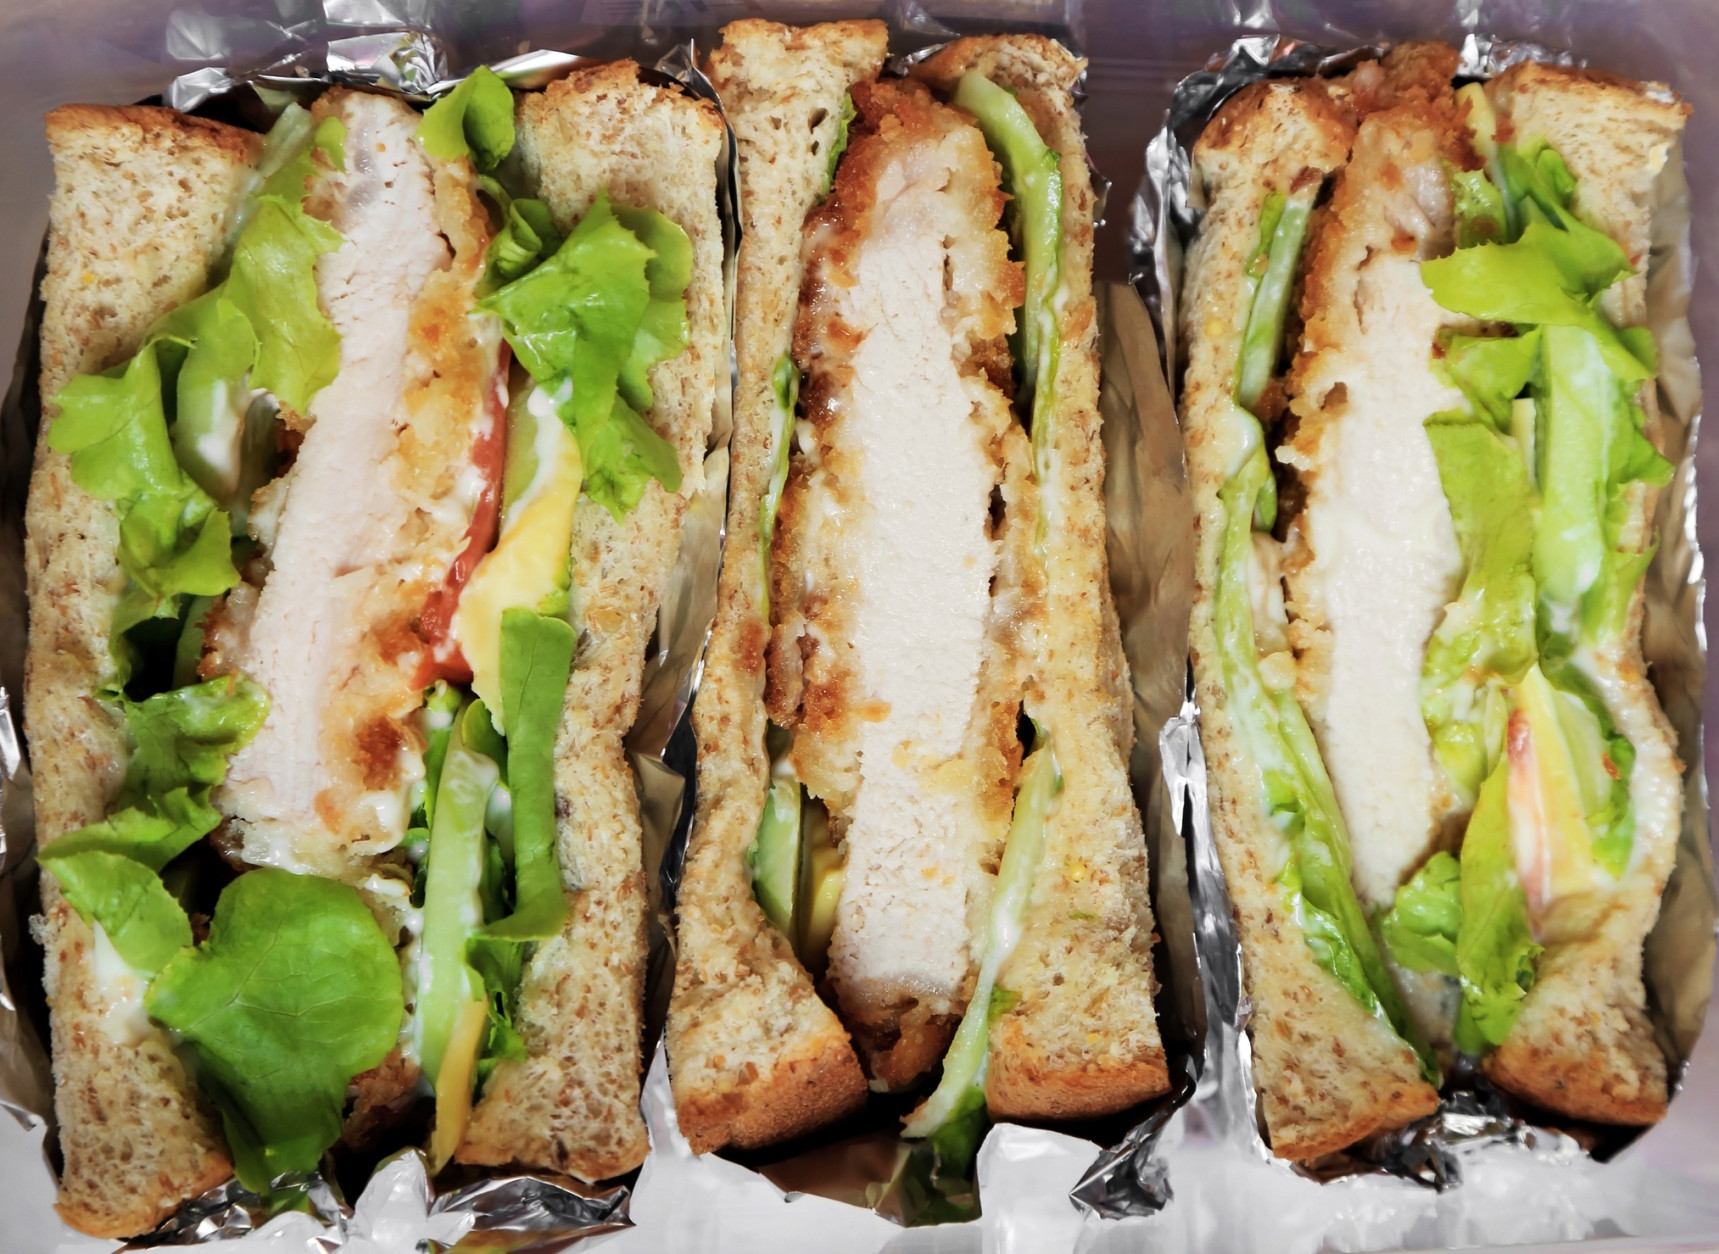 National Sandwich Day is Friday, Nov. 3. See what sandwich shops are offering deals and donations to celebrate. (Thinkstock)